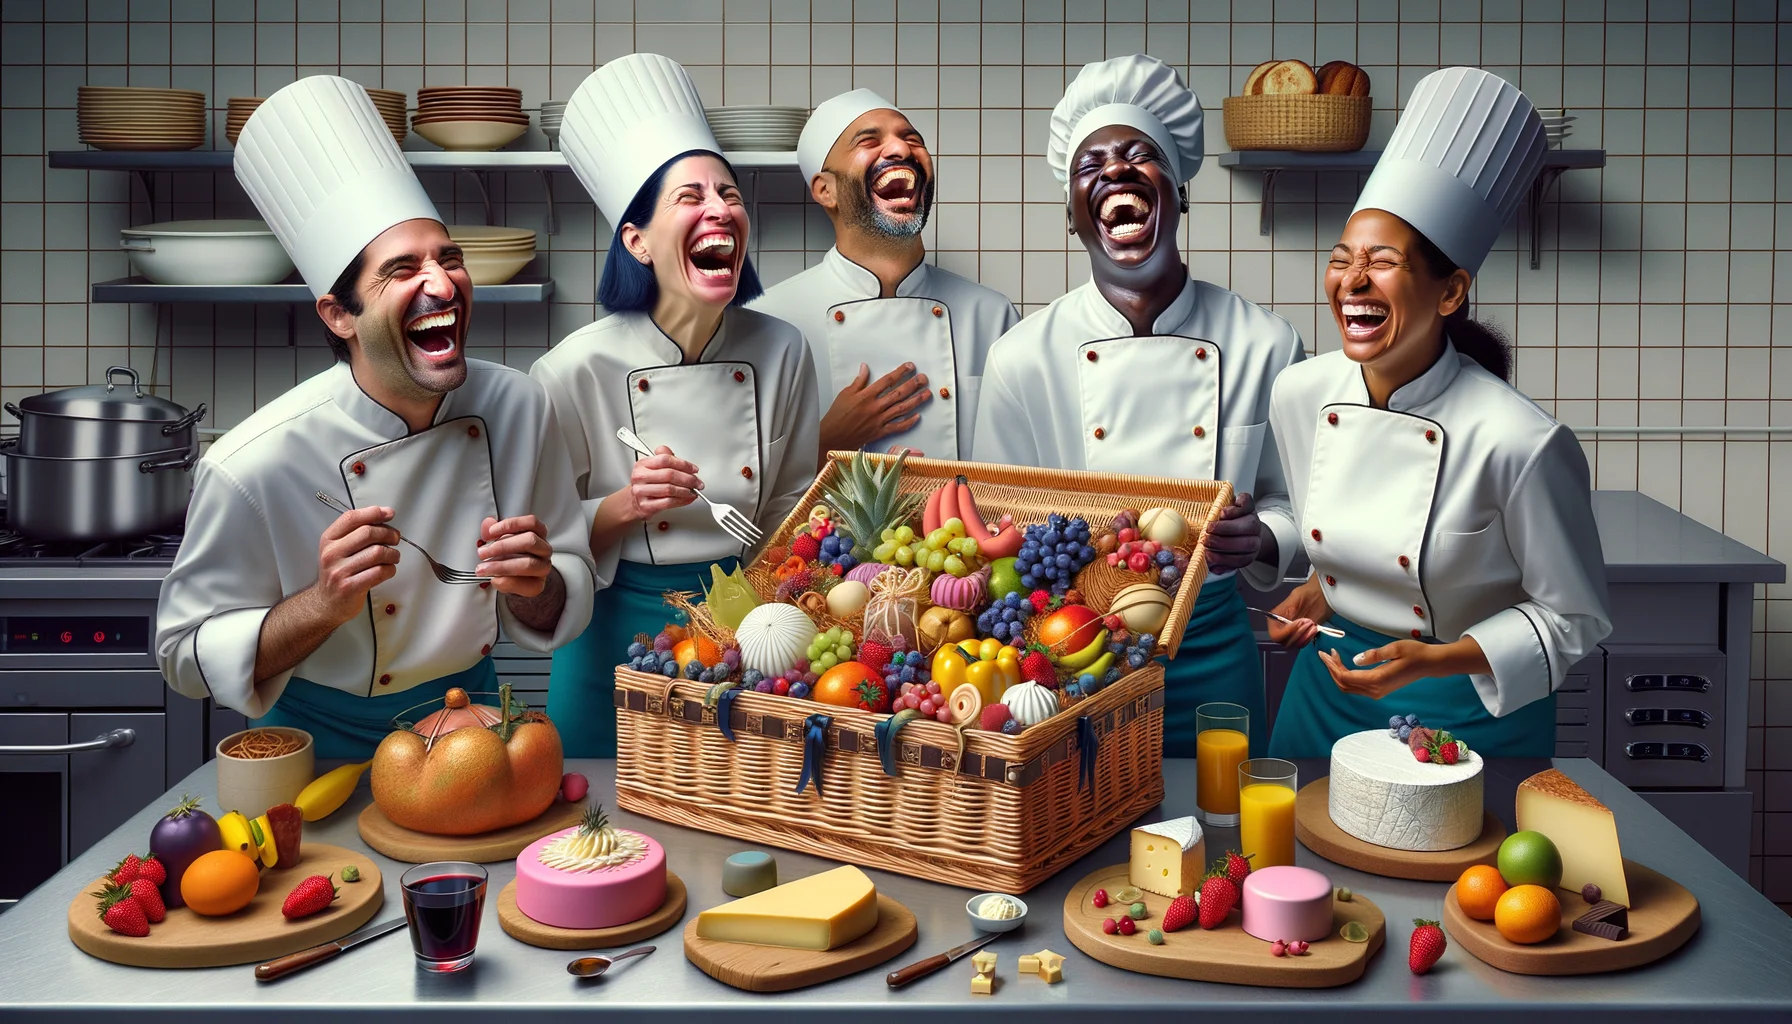 Create a colorful, humorous, and hyperrealistic image that depicts an unexpected scenario in a posh hotel kitchen. A team of diverse chefs, a Caucasian male pastry chef, a Black female sous chef, a South Asian male head chef, and a Hispanic female line cook, are cracking up with laughter as they prepare 'Gourmet Gift Baskets'. Each basket beautifully arranges a medley of rare fruits, artisanal cheeses, decadent chocolates, and sumptuous baked goods. Their laughter is so infectious that even the predominantly pastel colored kitchen utensils seem to be joining in the mirth.